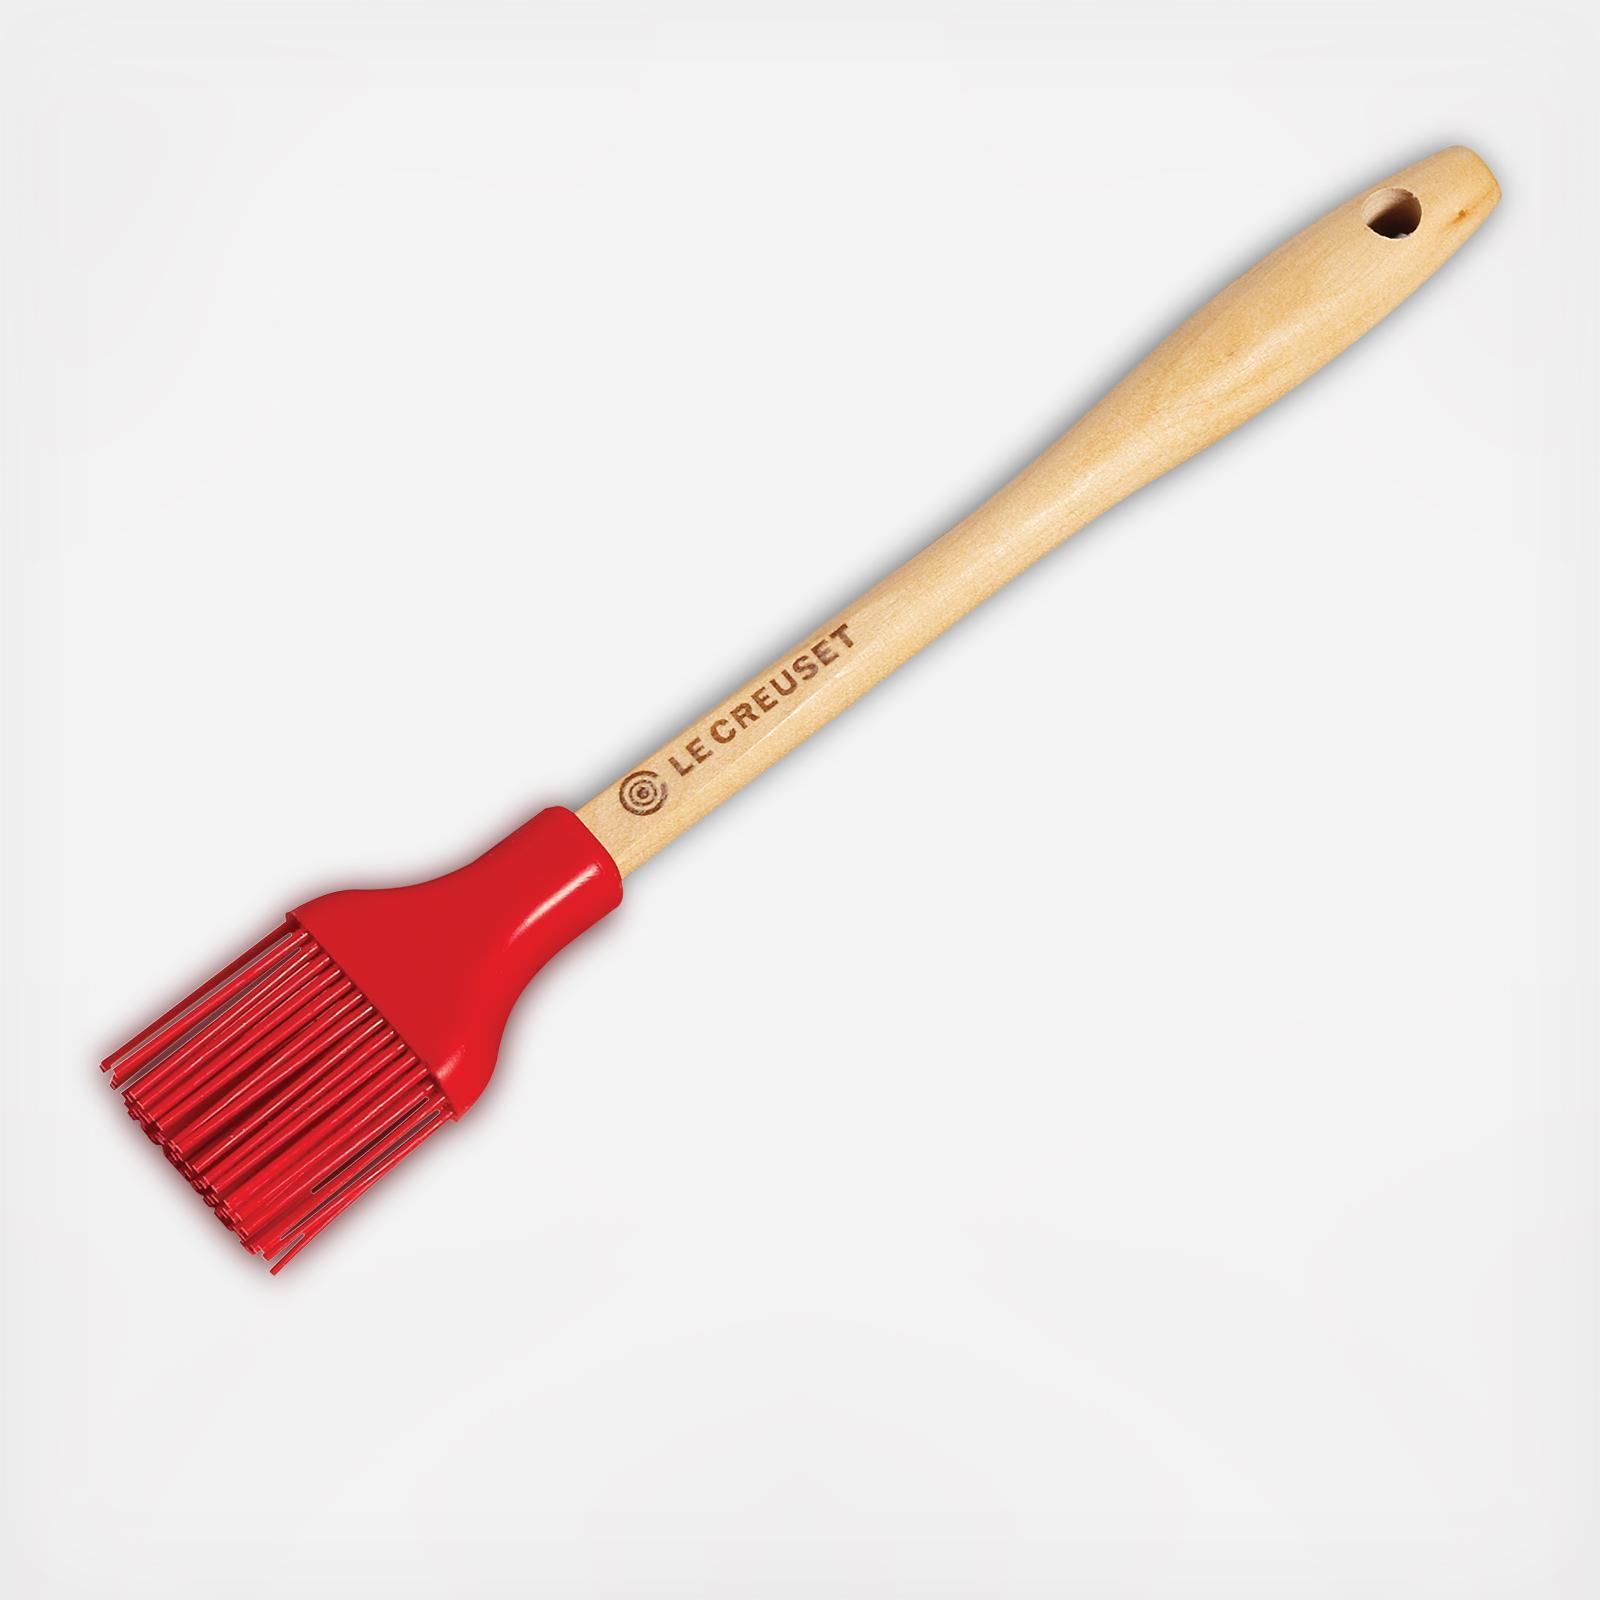 Le Creuset Craft Series Basting Brush - Oyster